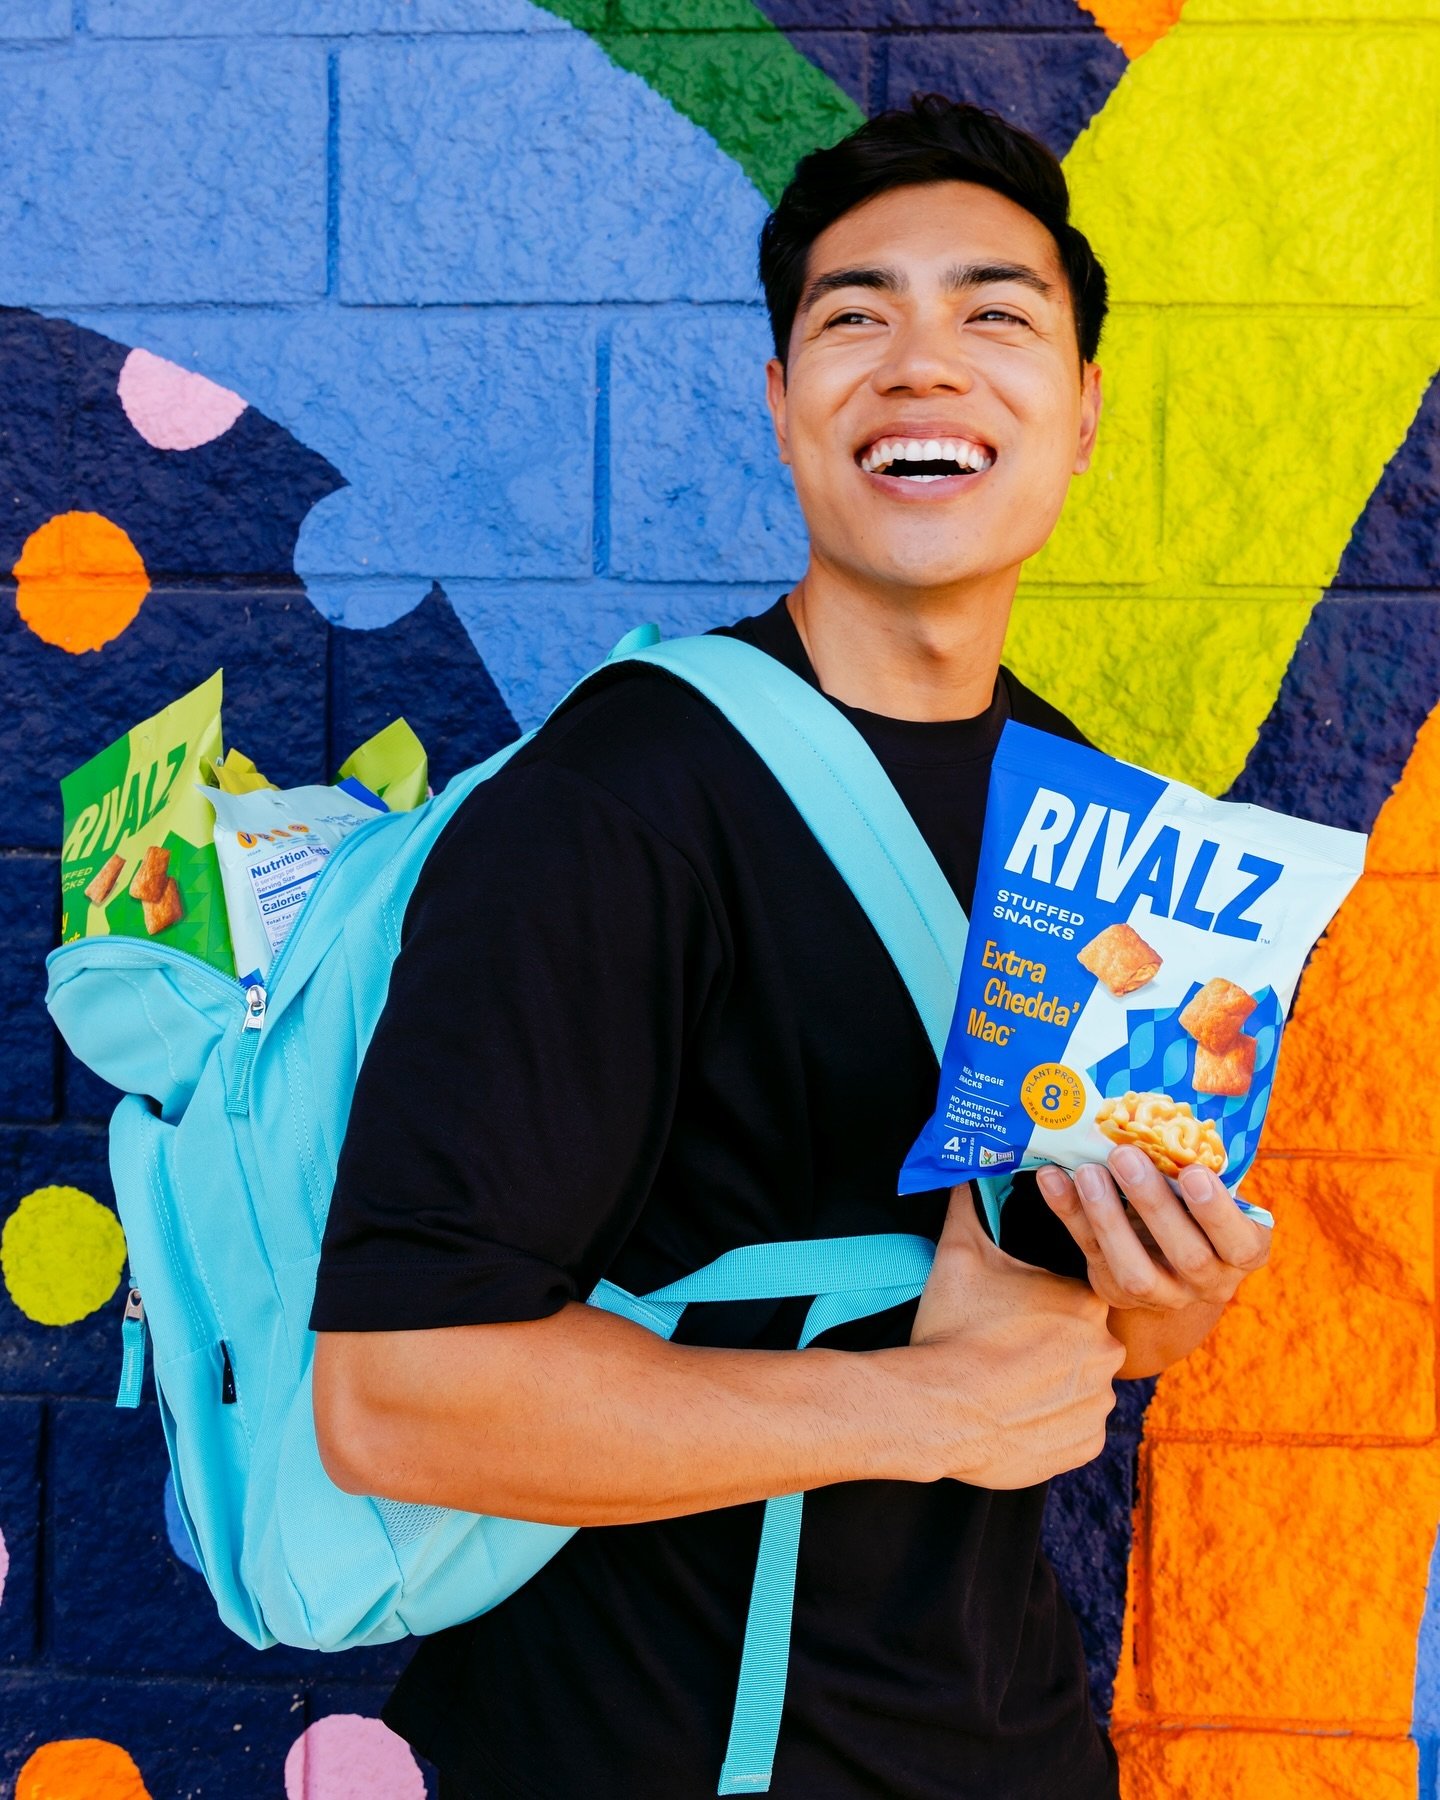 🧀🚨SORRY TO BE CHEESY but we are SO excited to announce our client @eat.rivalz was just nominated as one of the BEST CHEESY SNACKS by @vegnews. Have you tried Rivalz yet? 

#plantbased #vegansnacks #cheesysnack #foodfounder #startupcpg #socialmediam